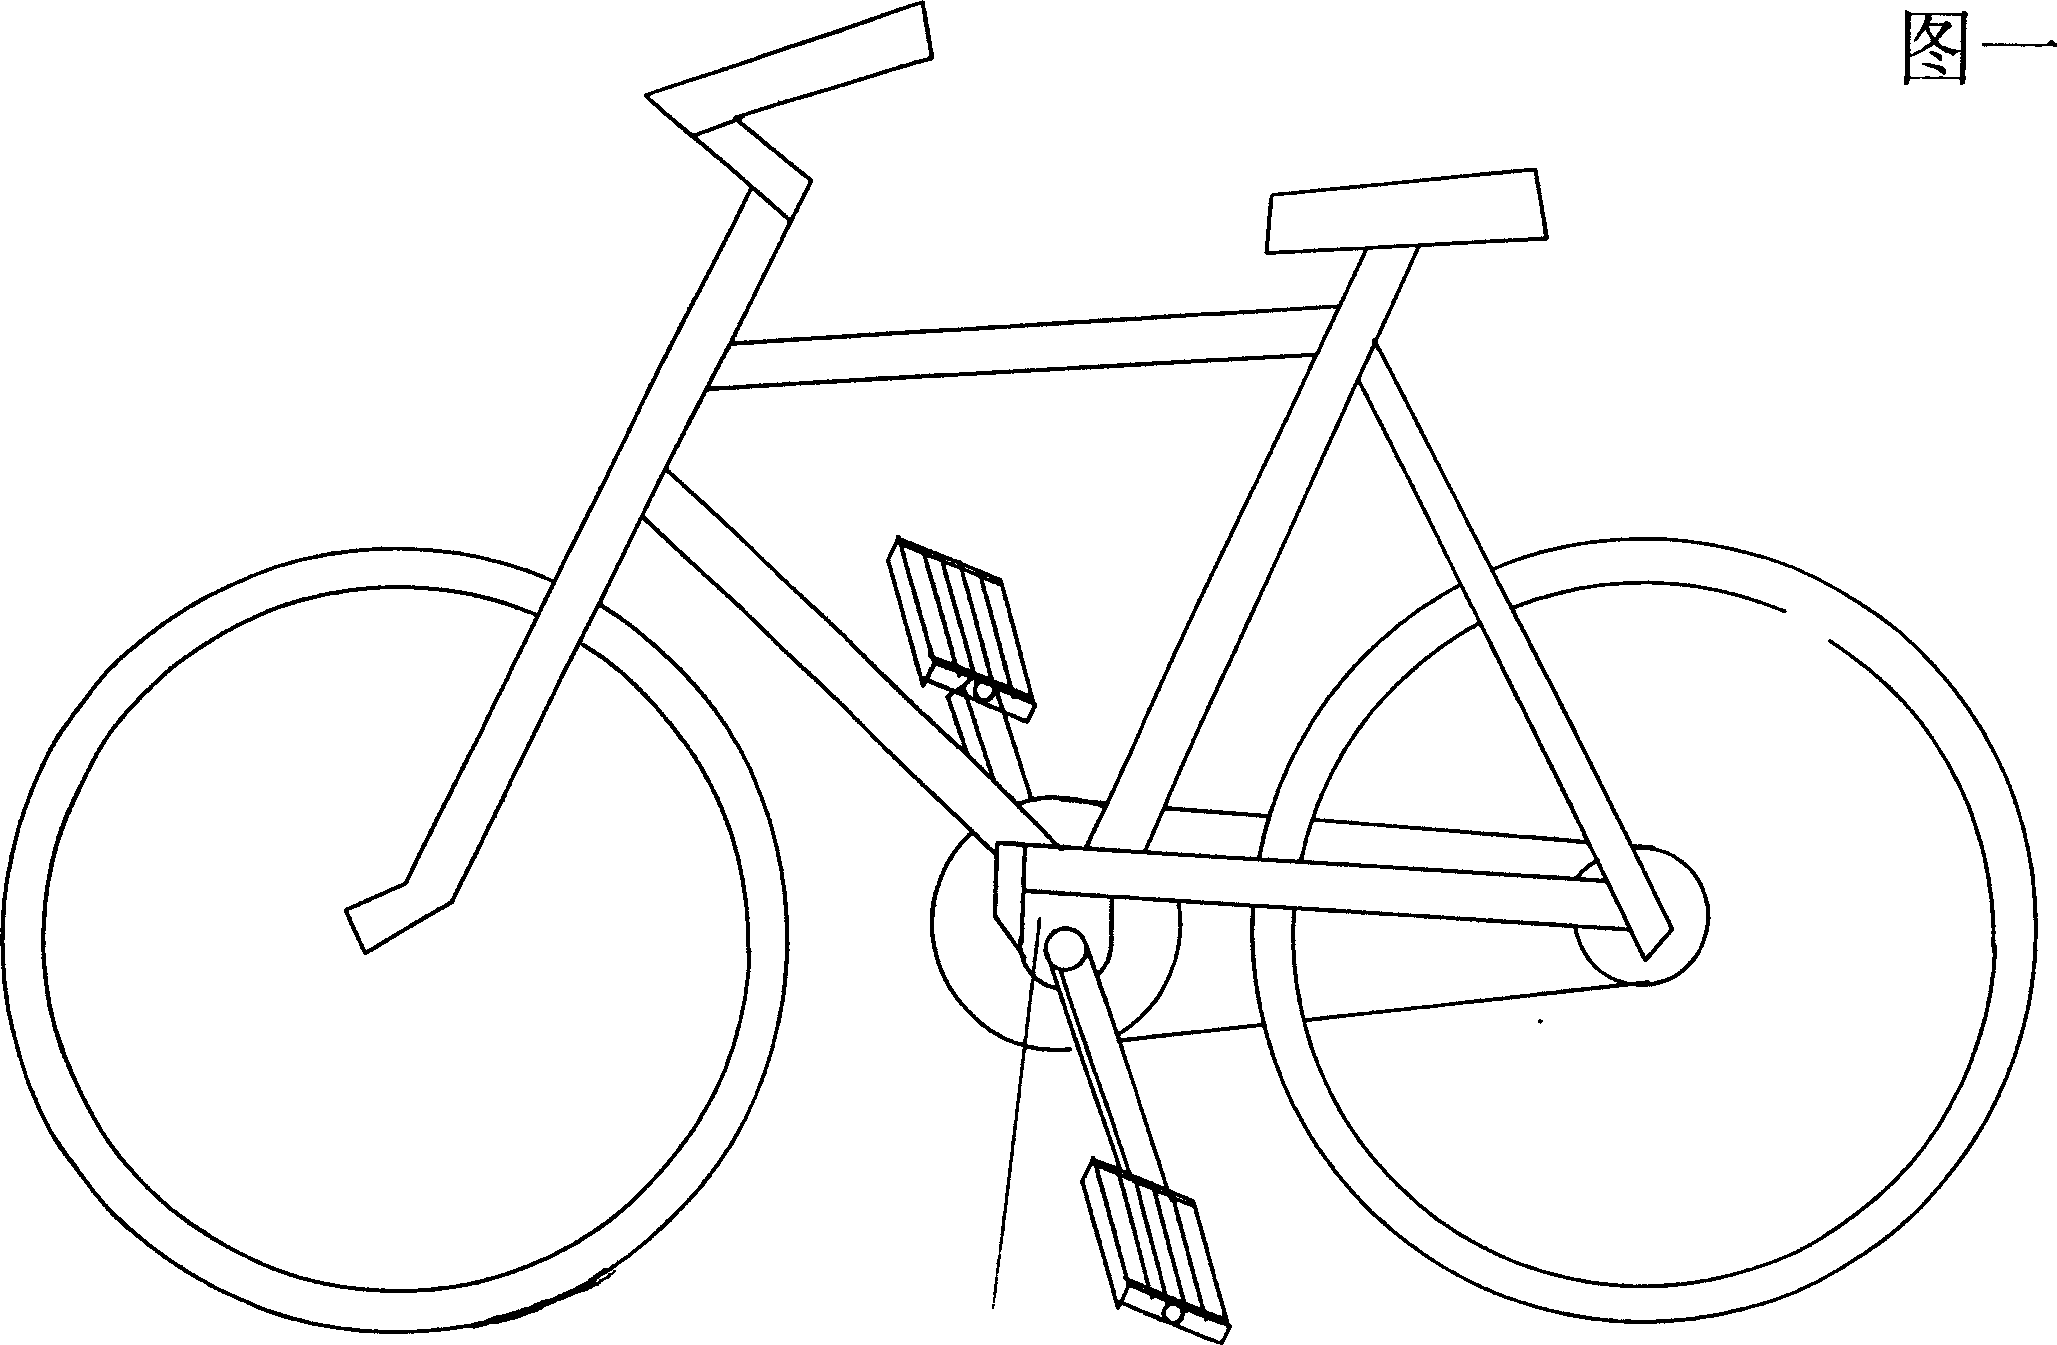 Foot controlled speed changing device for bicycle